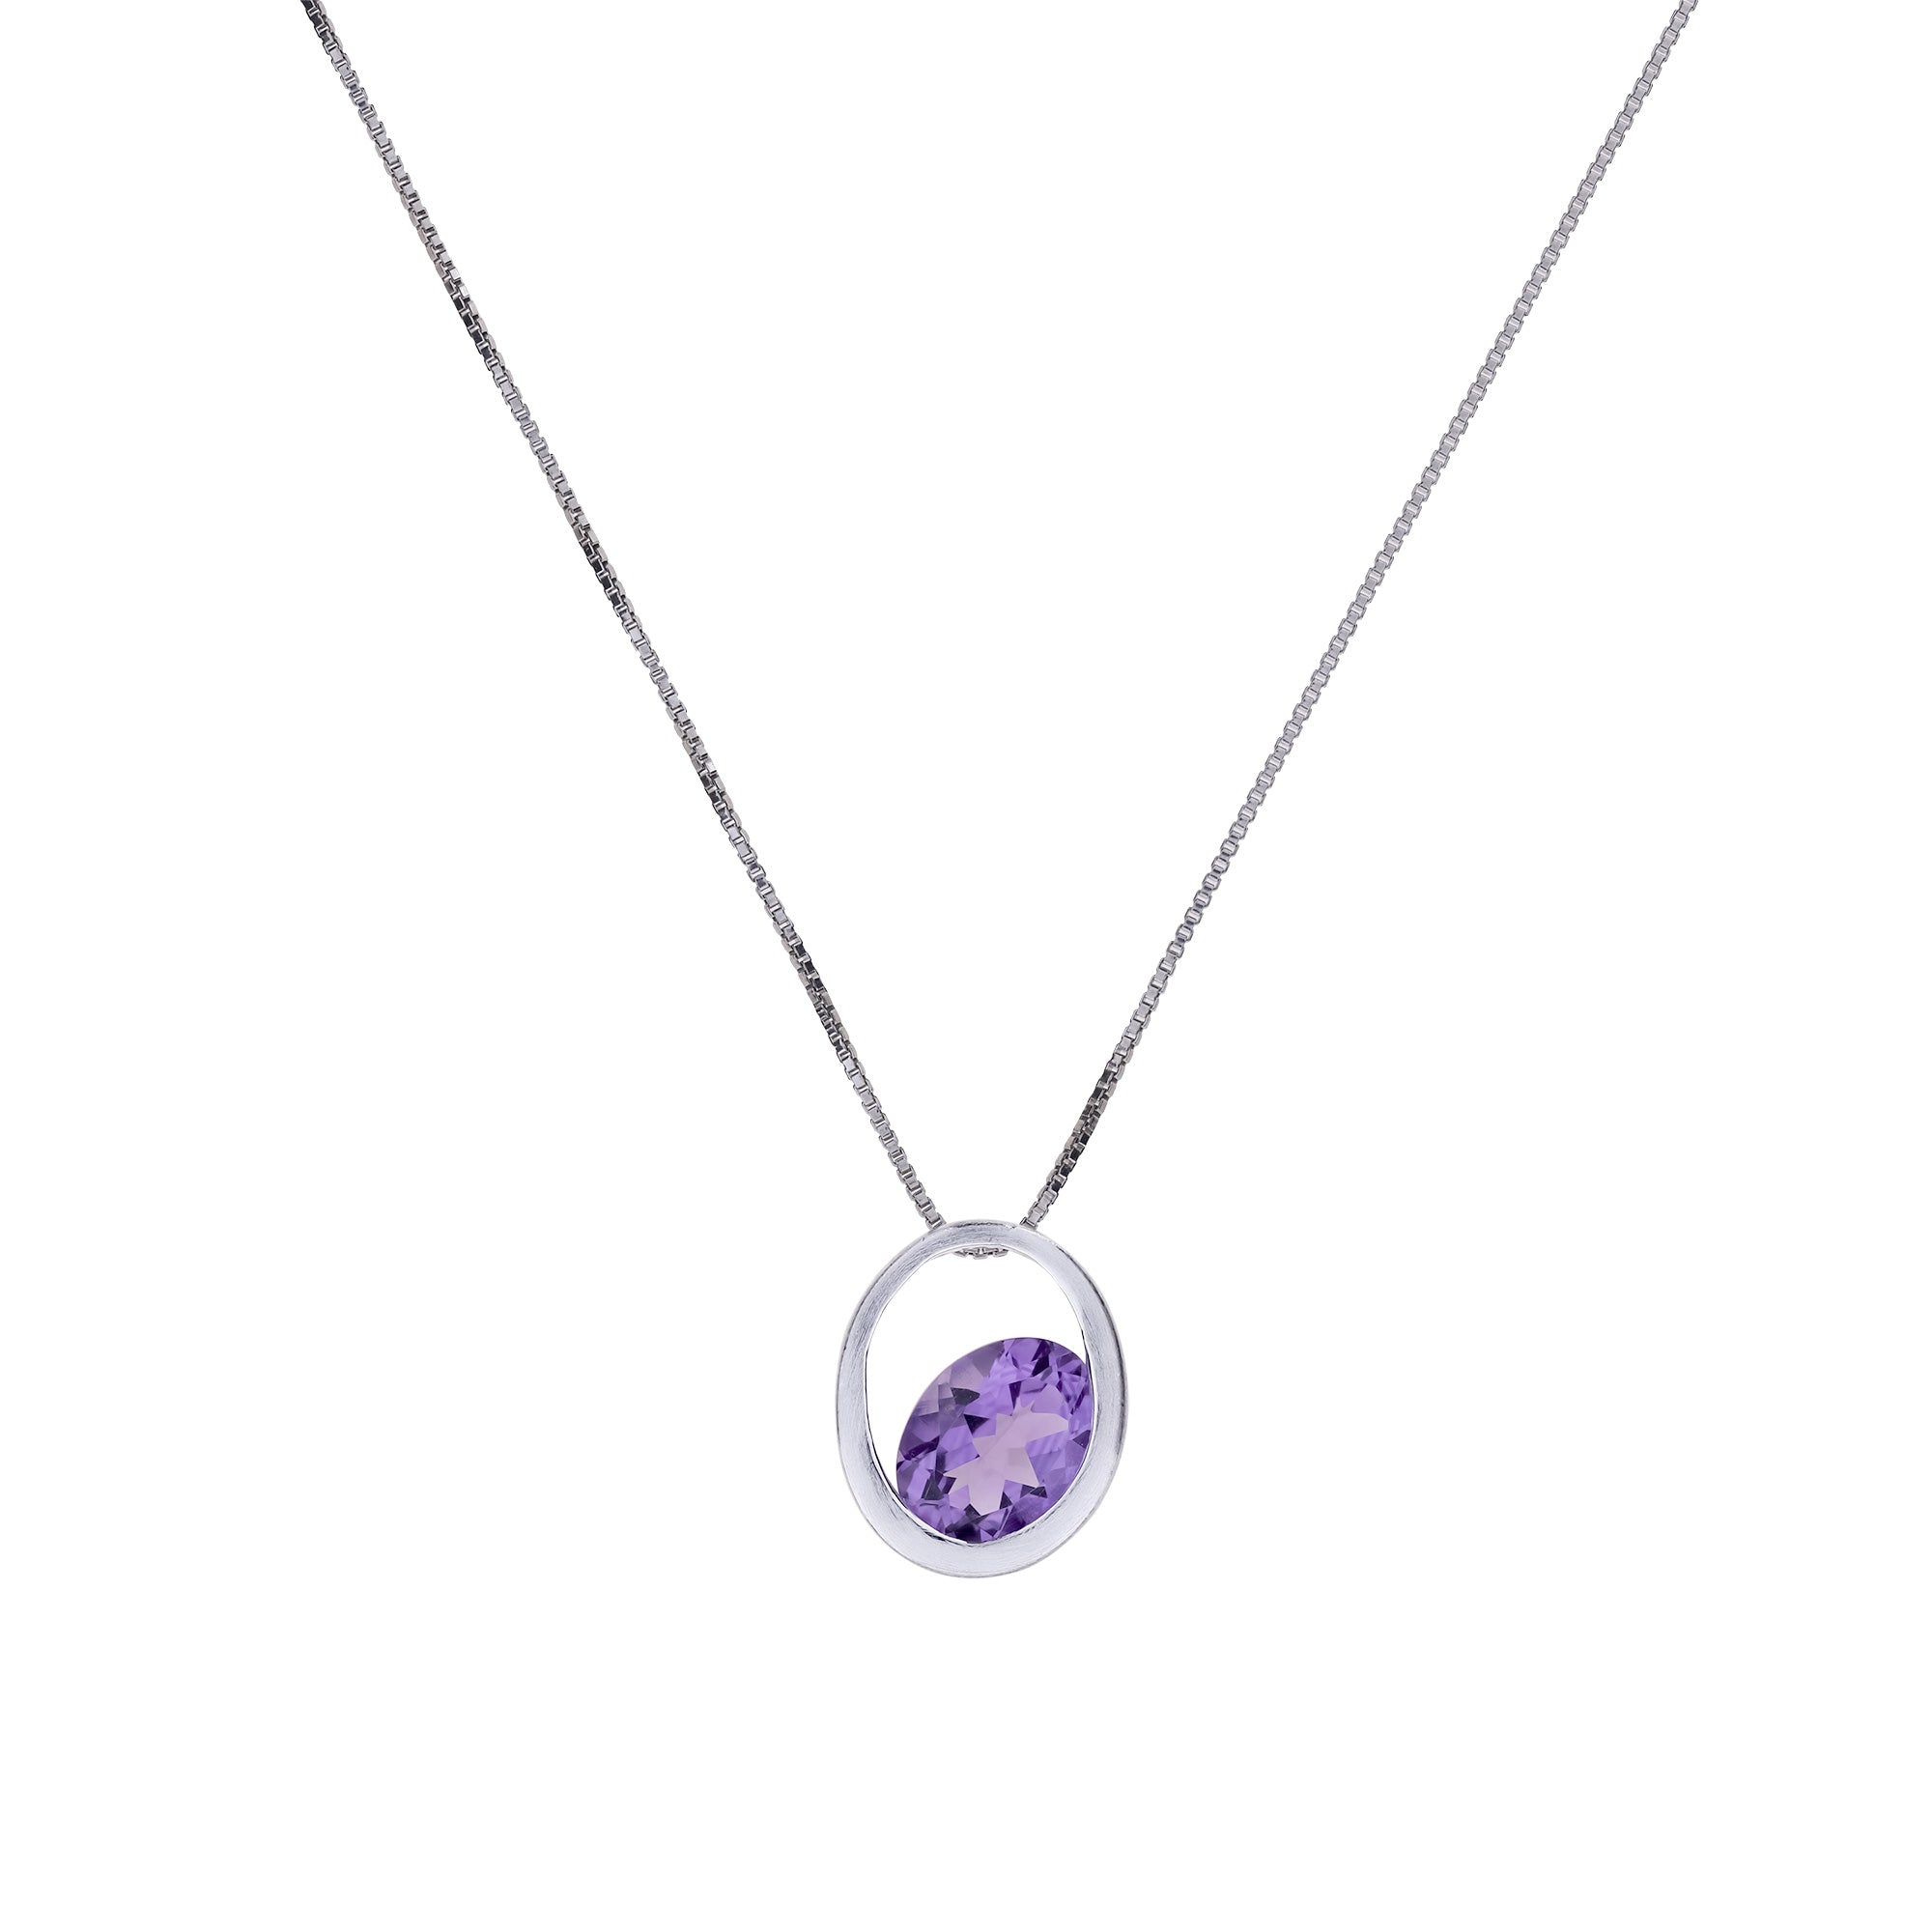 Silver Oval Pendant with Amethyst